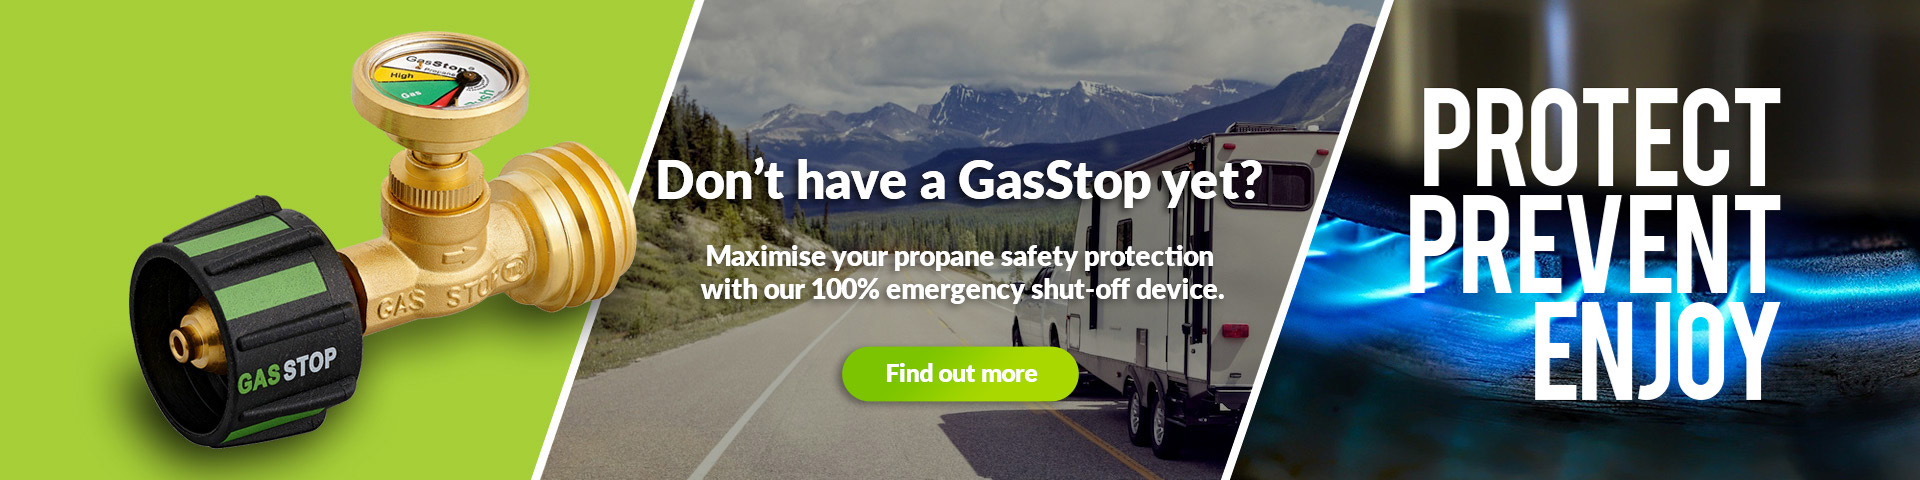 Don't have a GasStop yet? Learn more